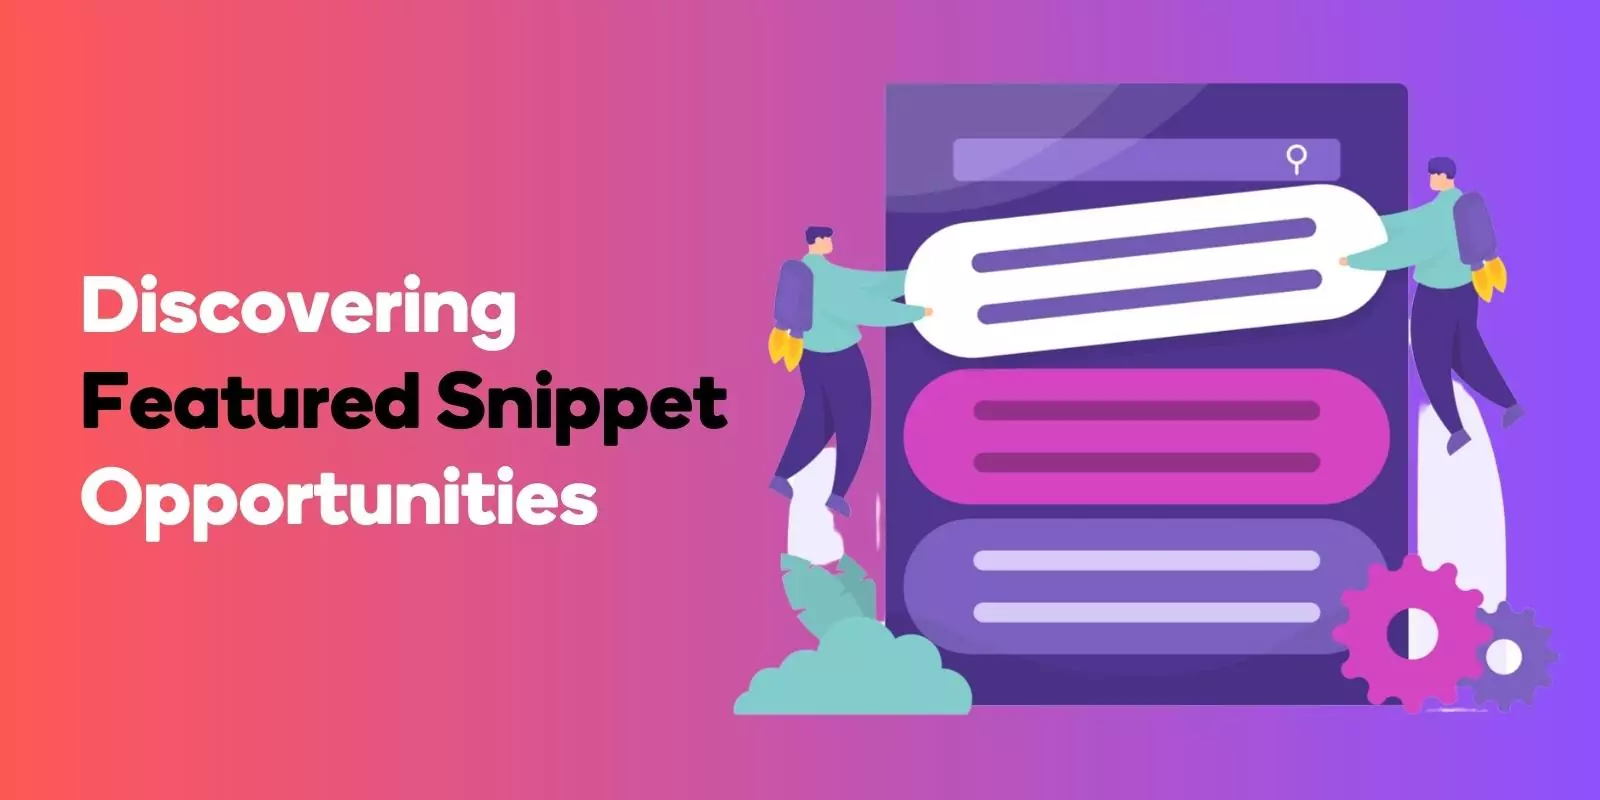 Discovering Featured Snippet Opportunities